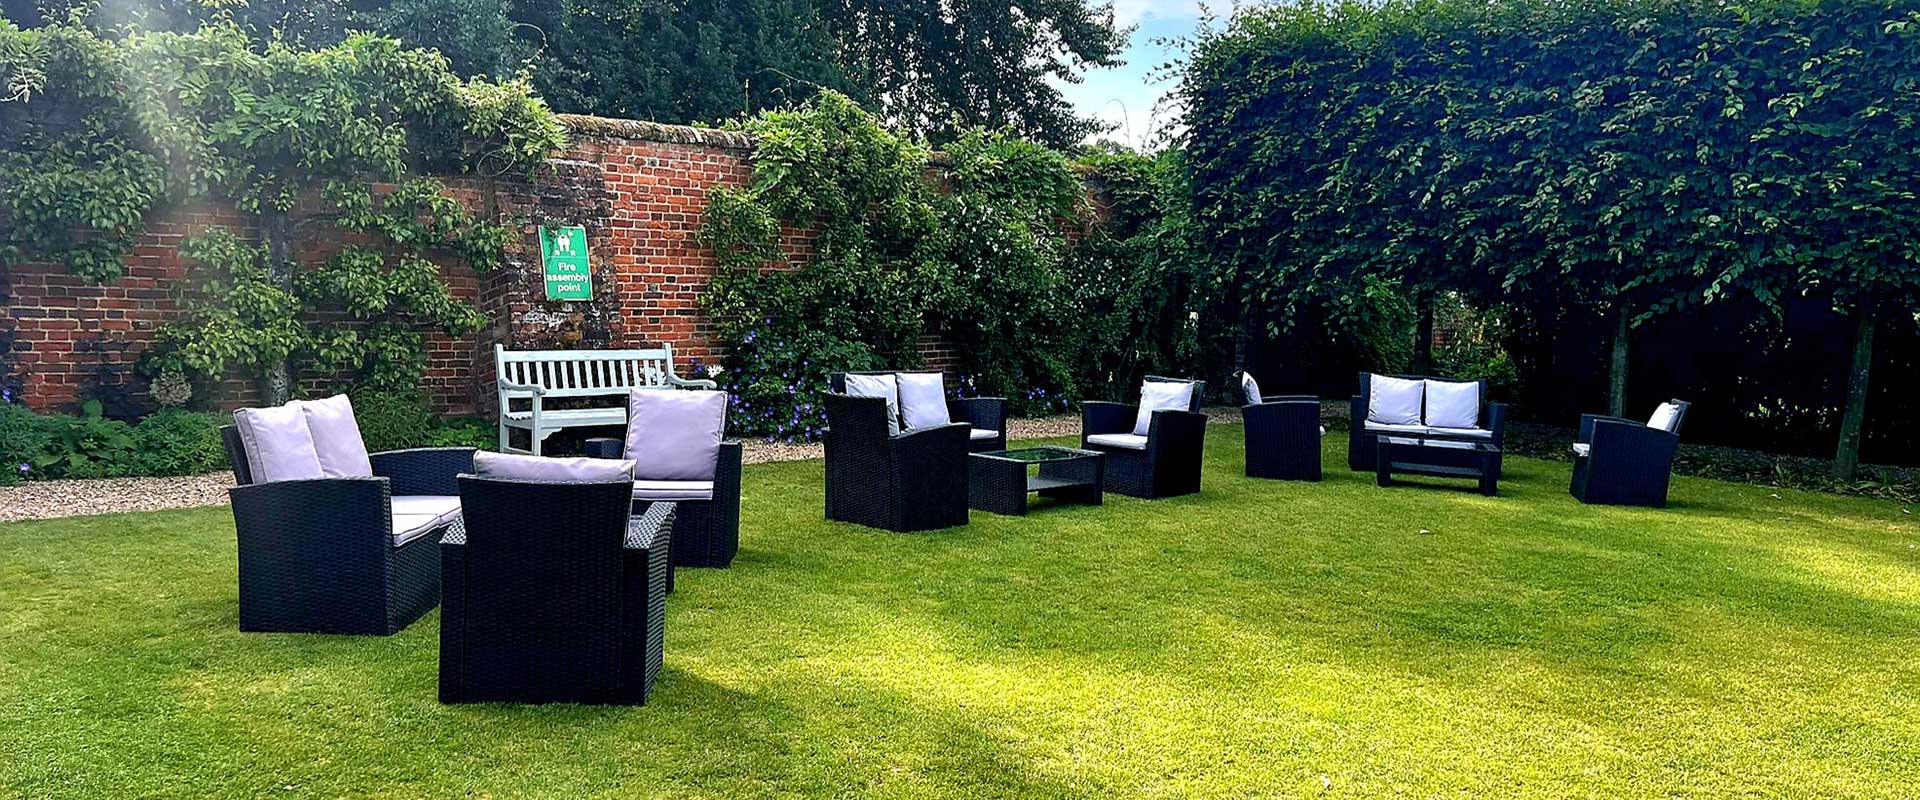 Rattan garden furniture on hire at braxted park